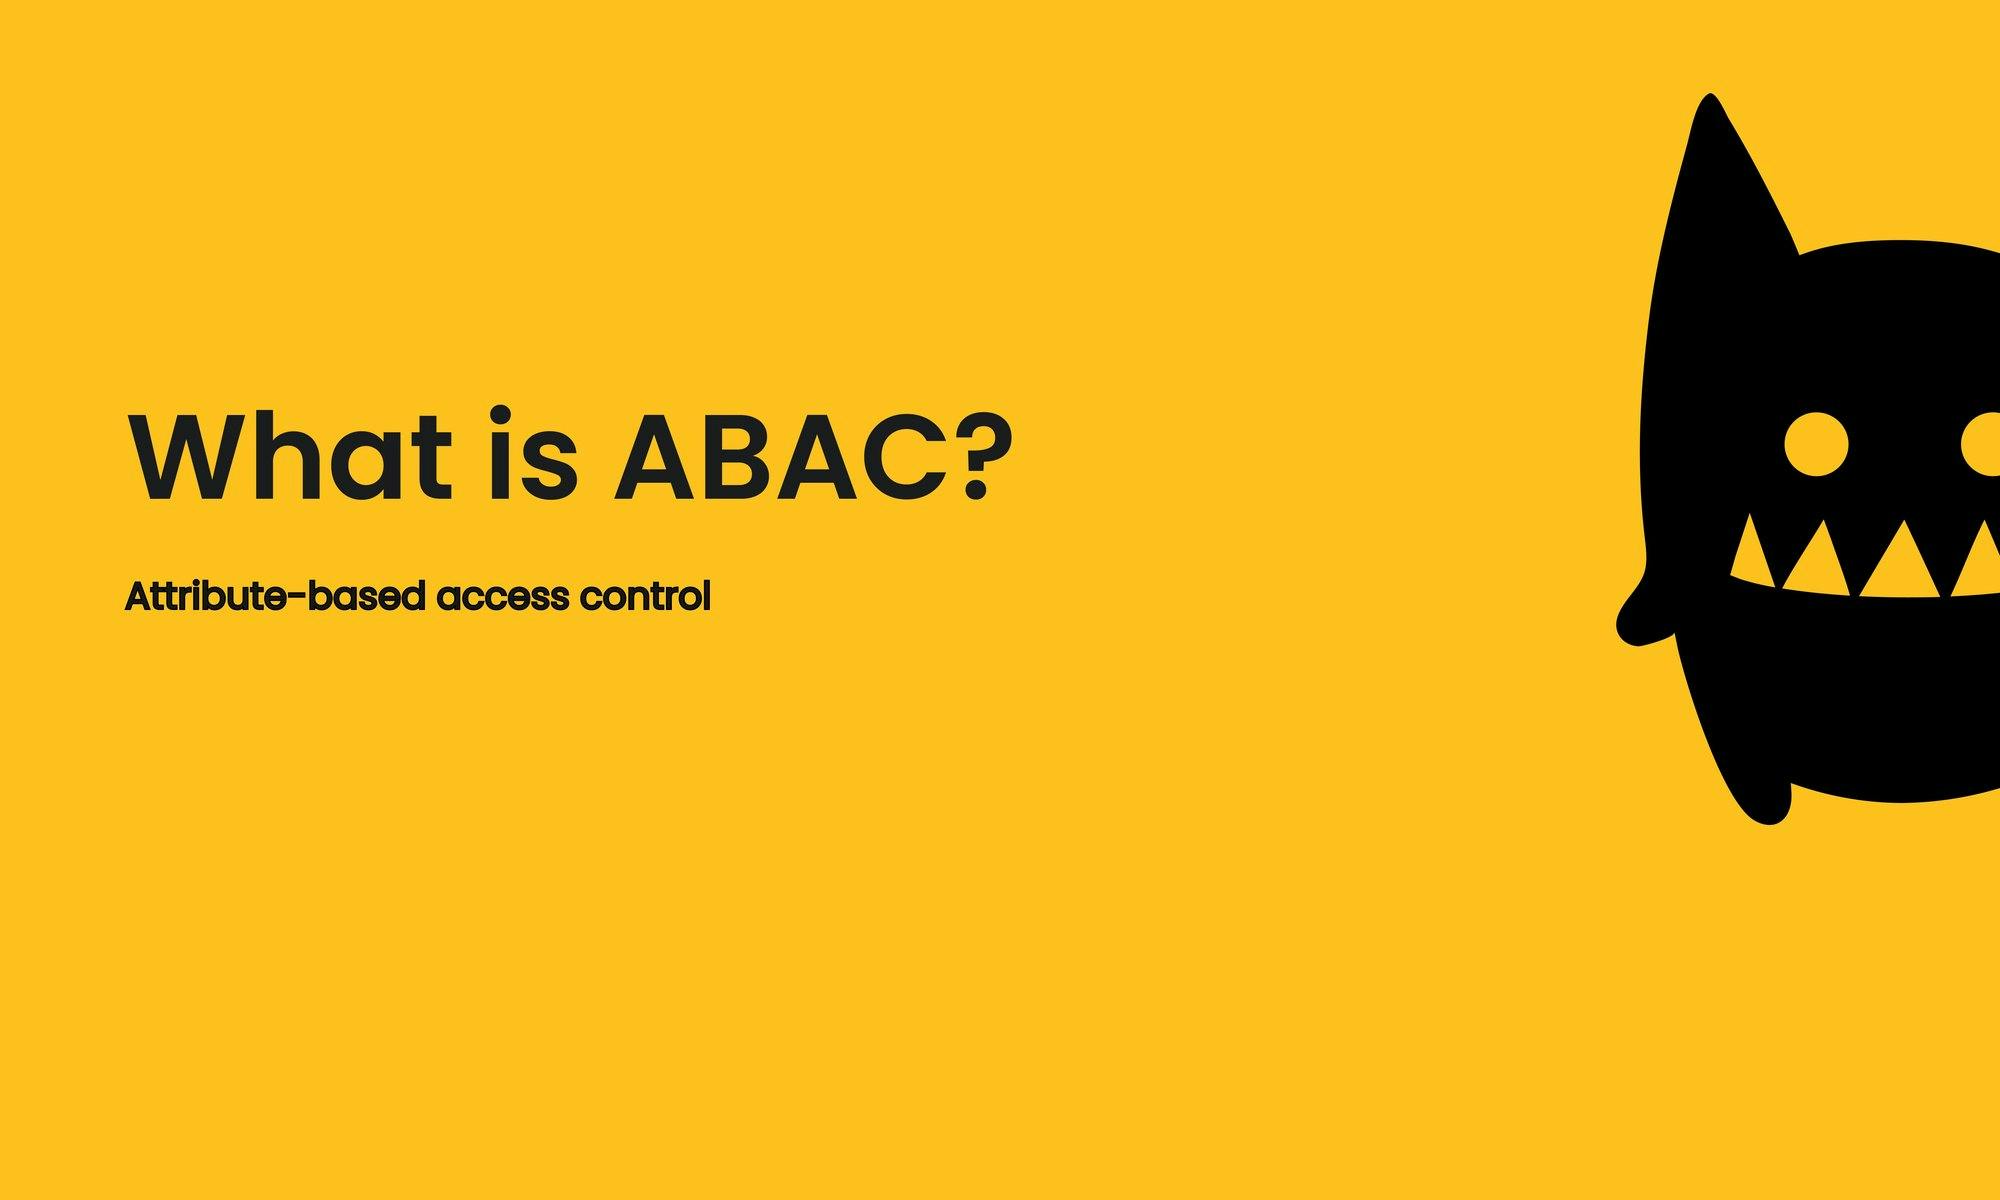 What is ABAC (Attribute-based access control)?